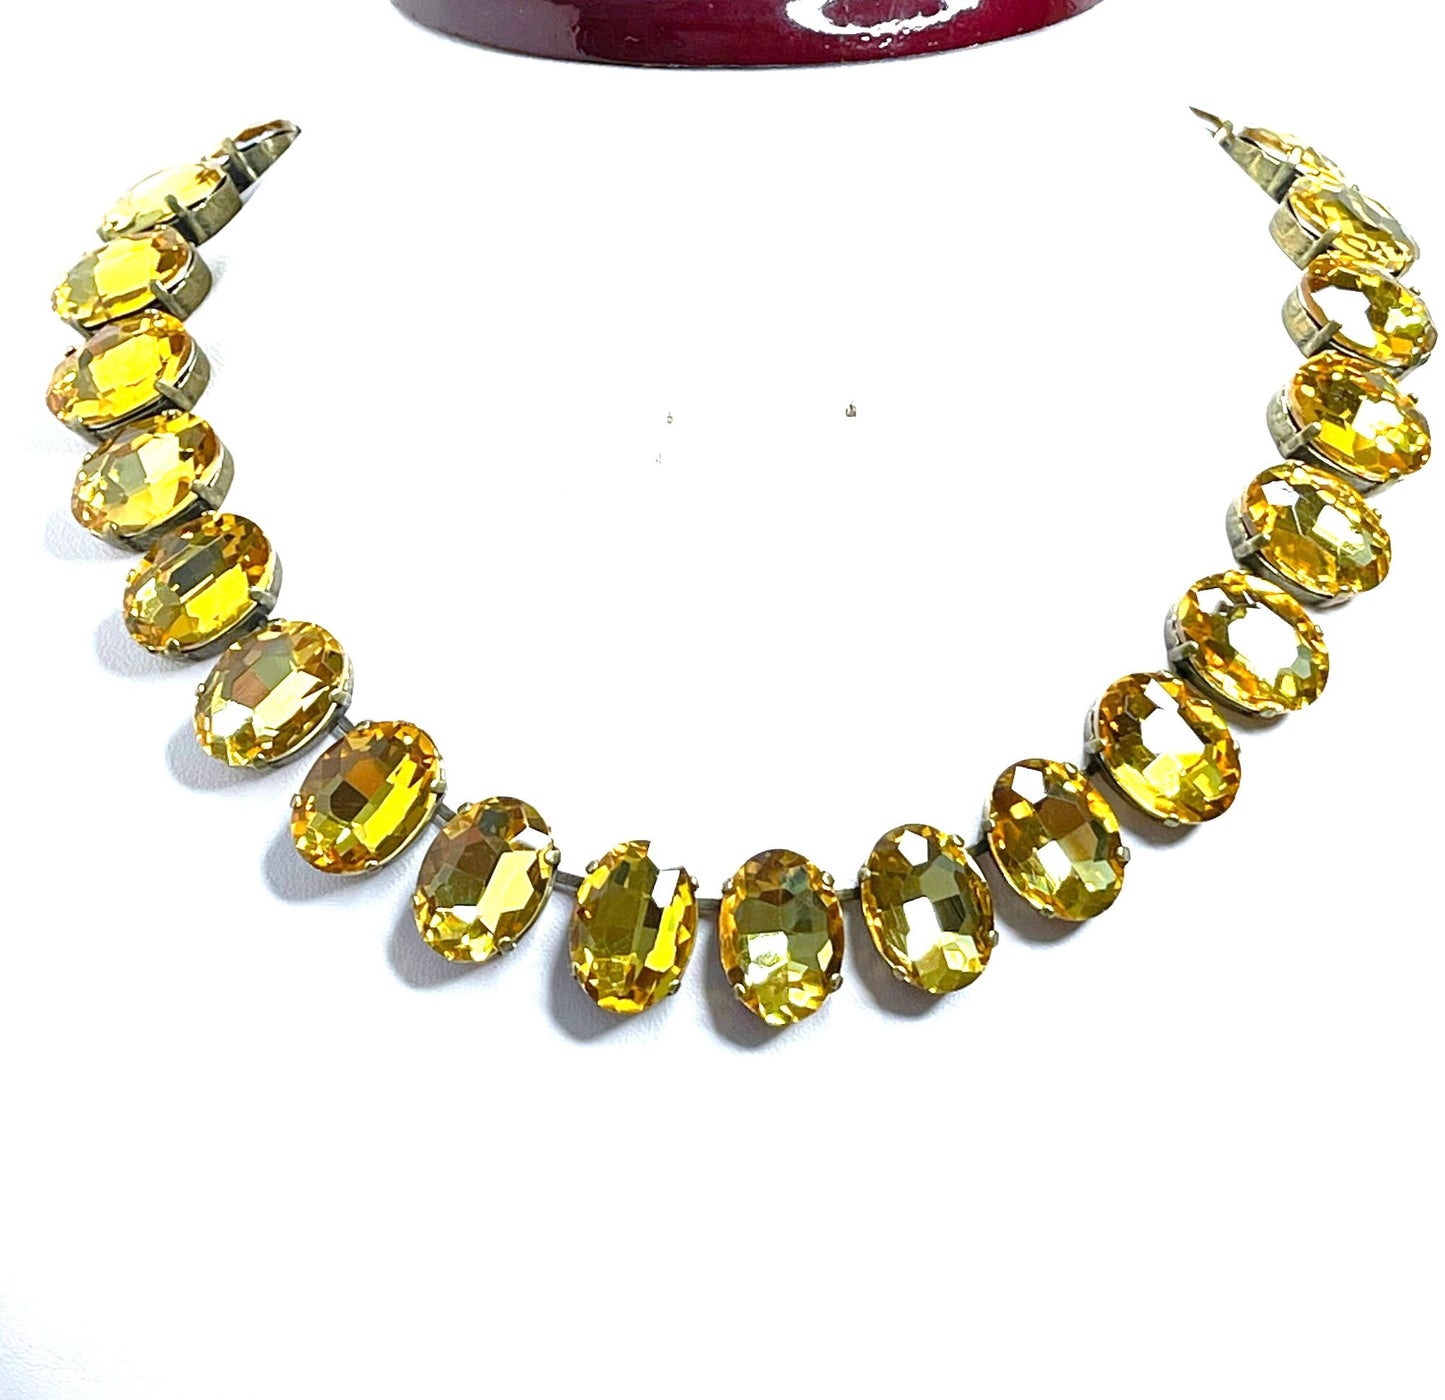 Yellow Crystal Georgian Collet Necklace, Anna Wintour Style, Yellow Crystal Choker, Riviere Necklace, Statement Necklace for Women